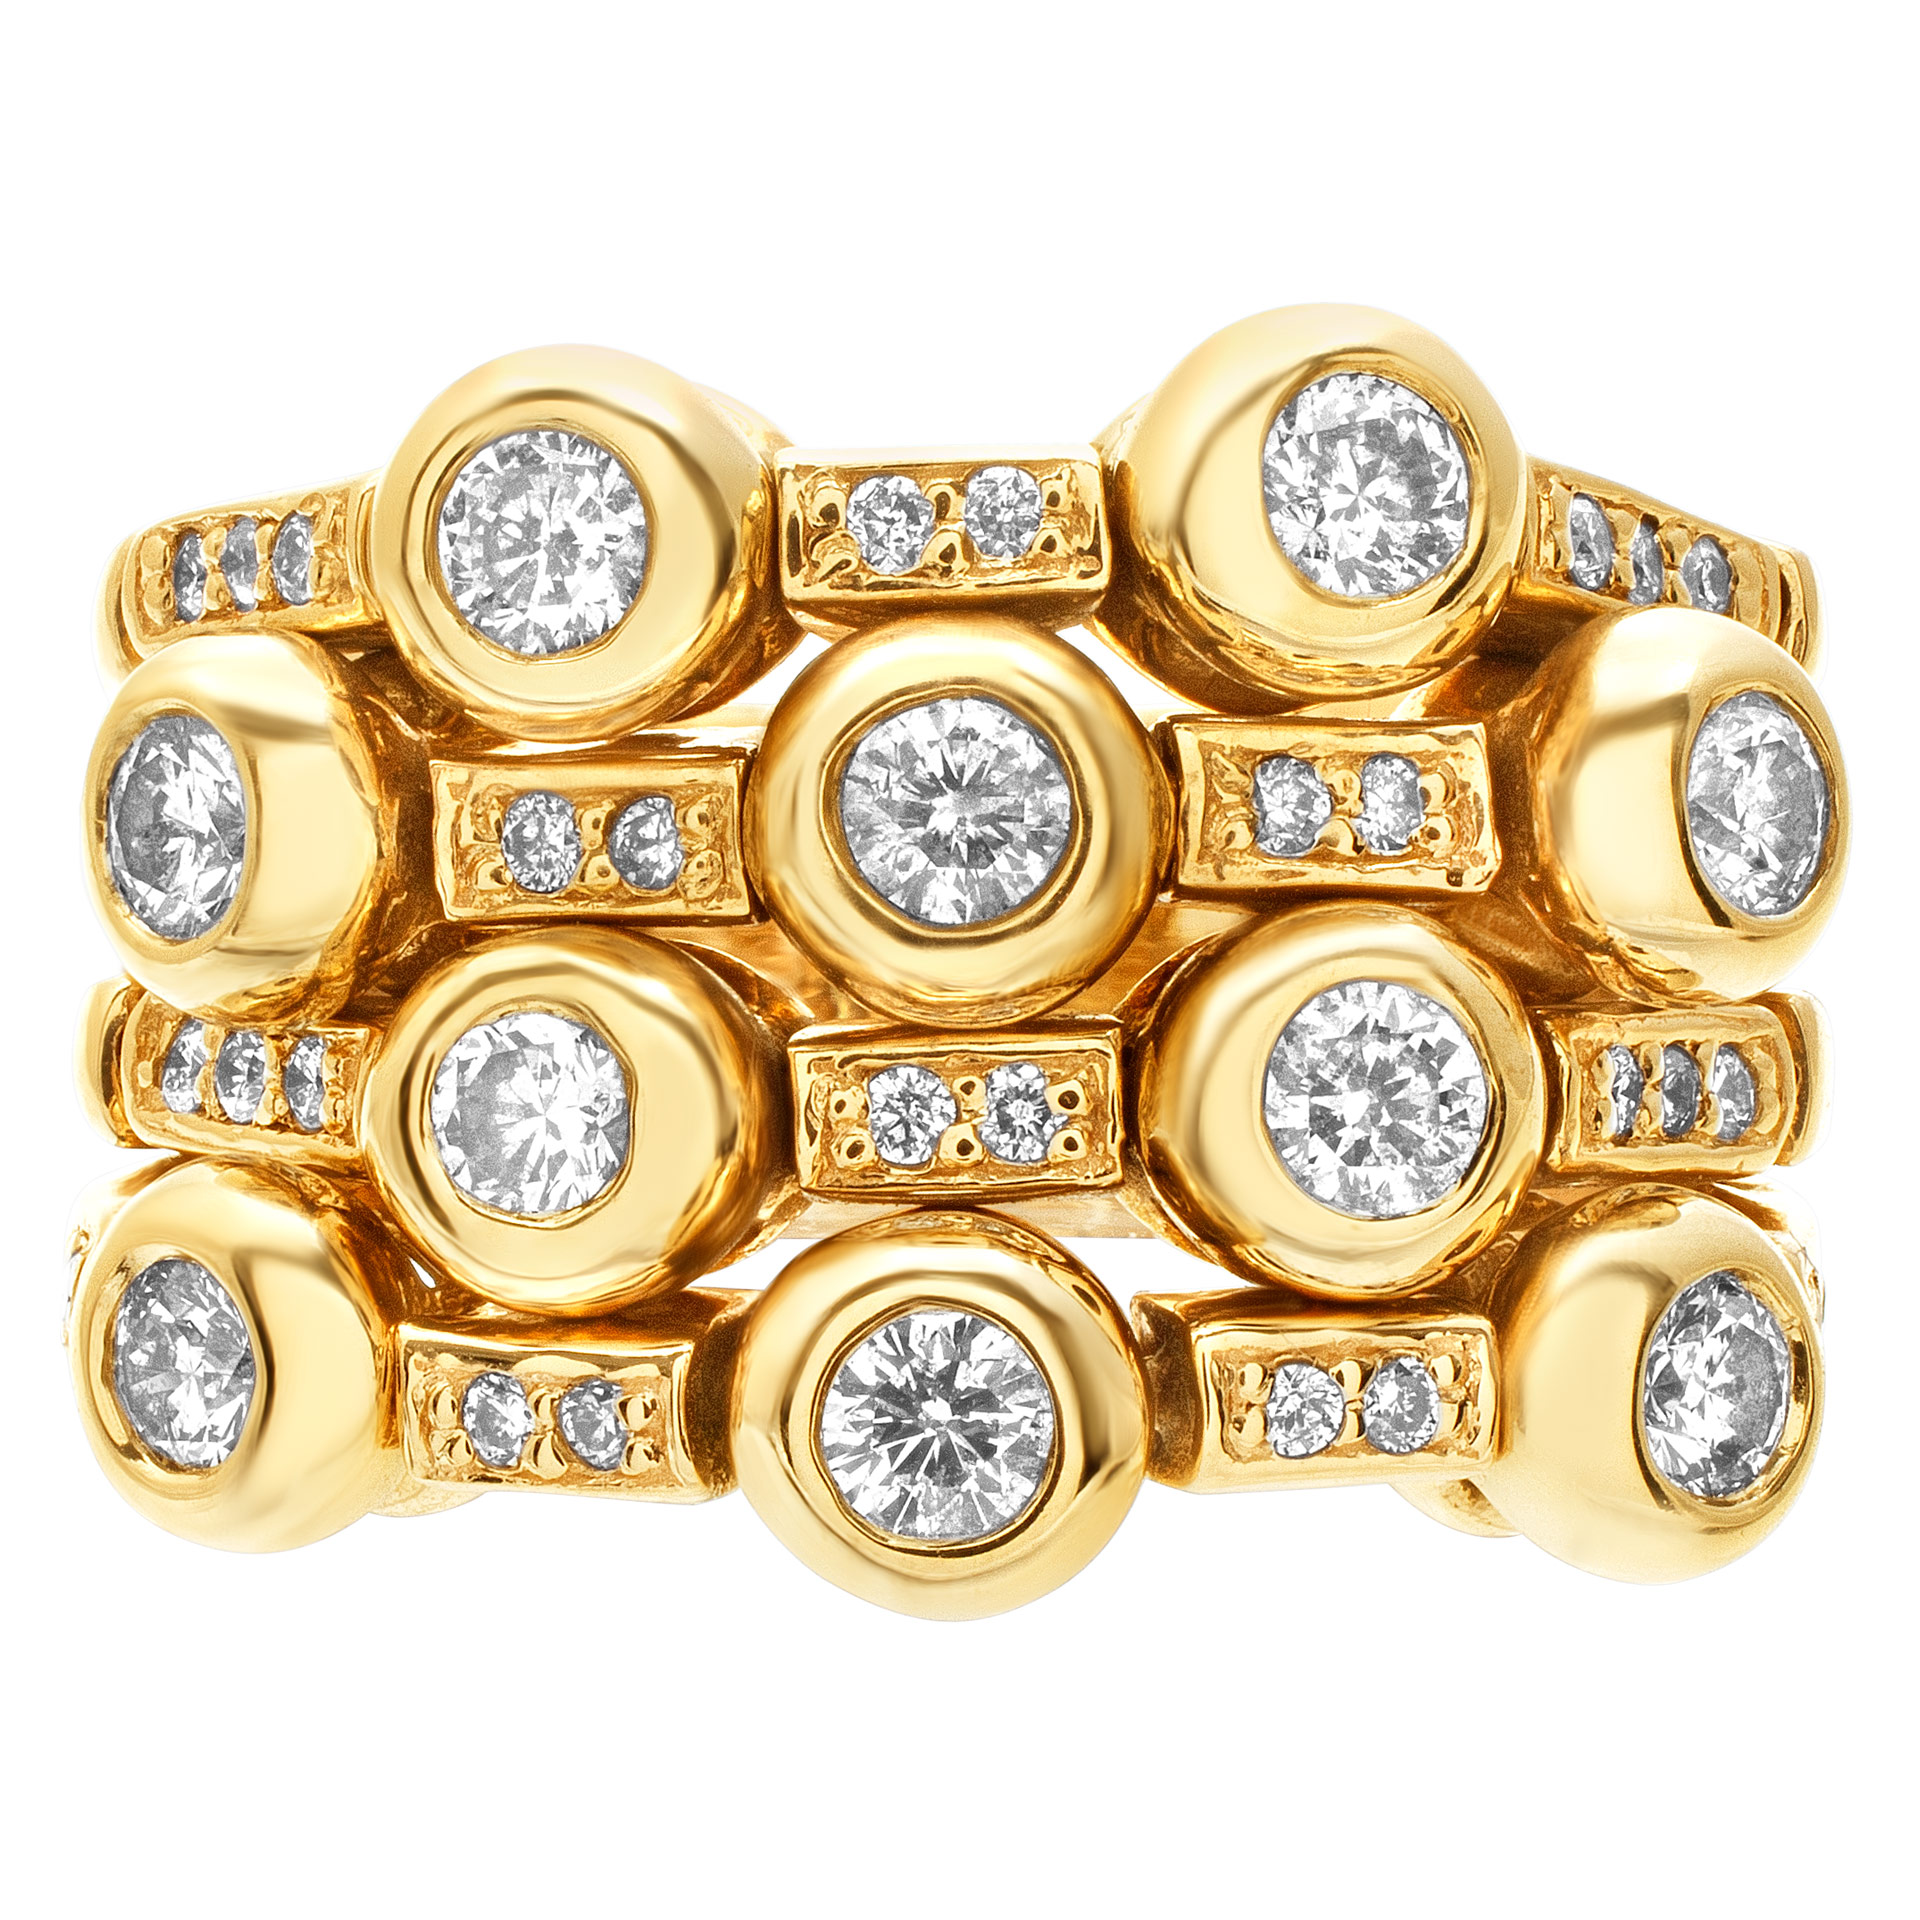 Flexible diamond ring with over 1.0 ct in diamonds set in 14k gold image 1